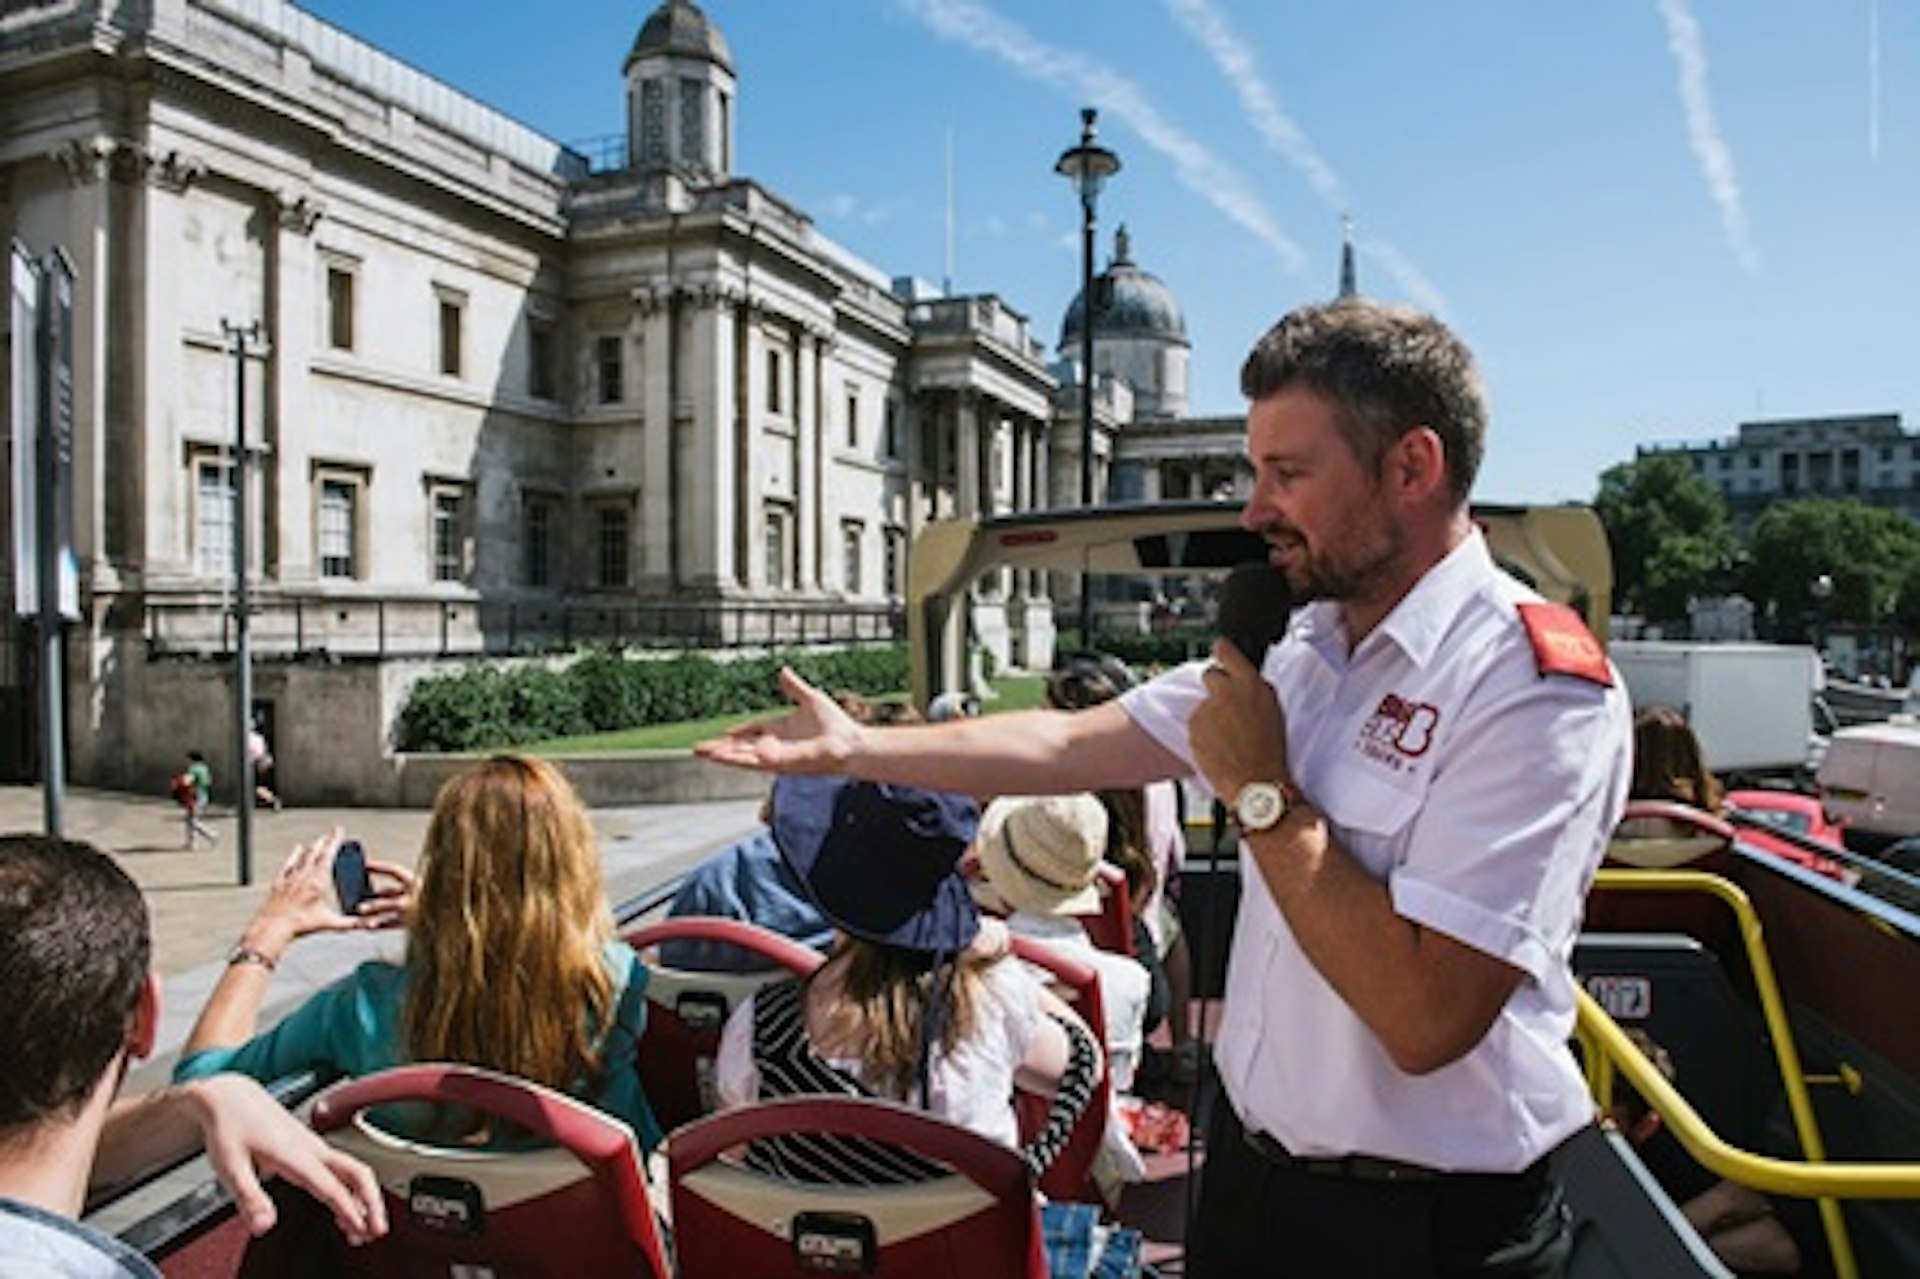 Explore London with Sightseeing Bus Tour, River Cruise and Hard Rock Cafe Dining Experience for Two